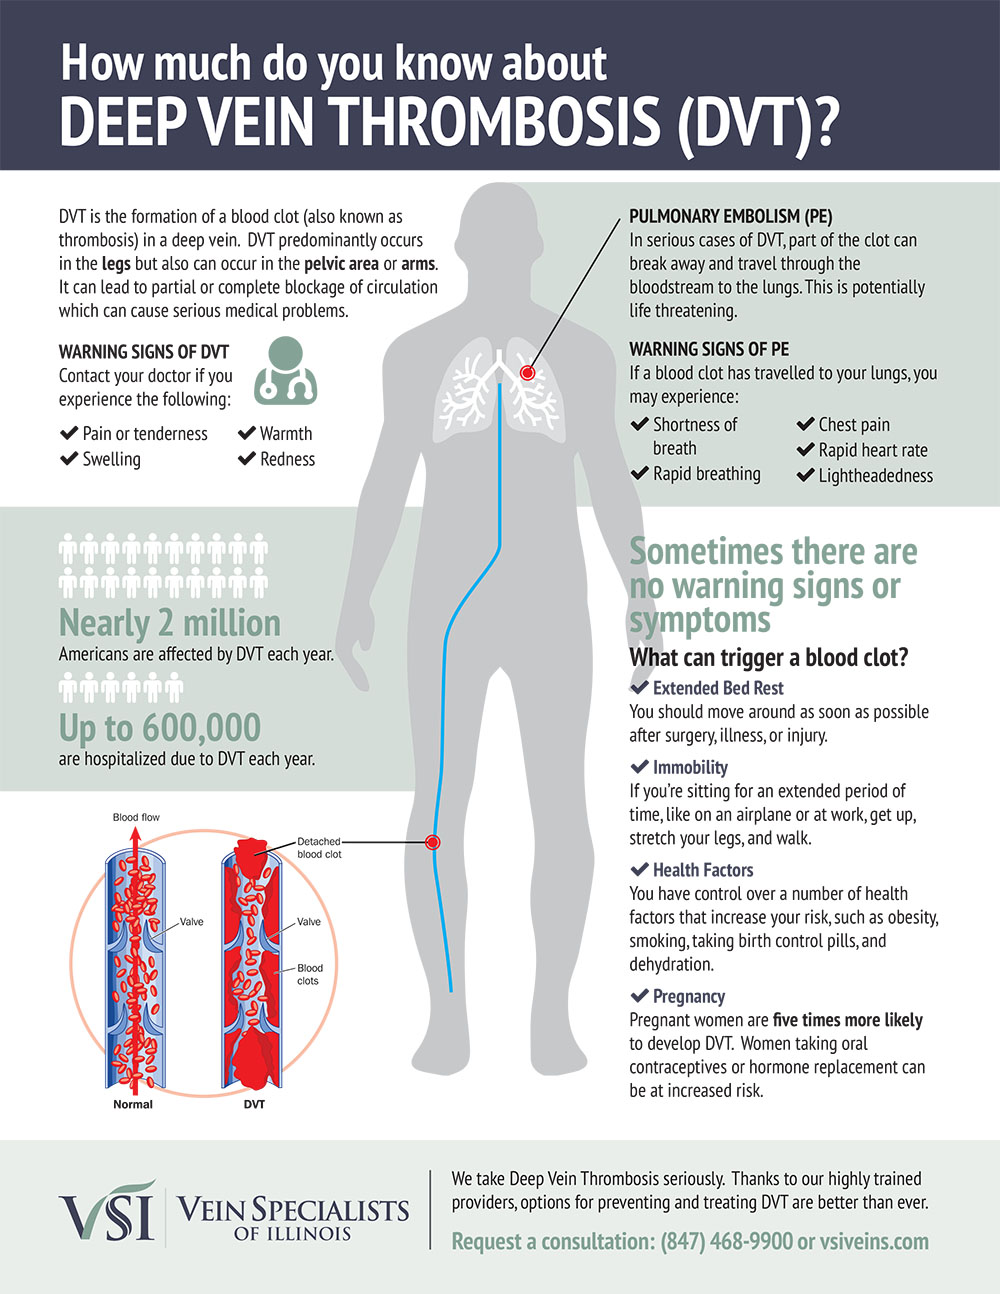 5 Key Facts about Deep Vein Thrombosis